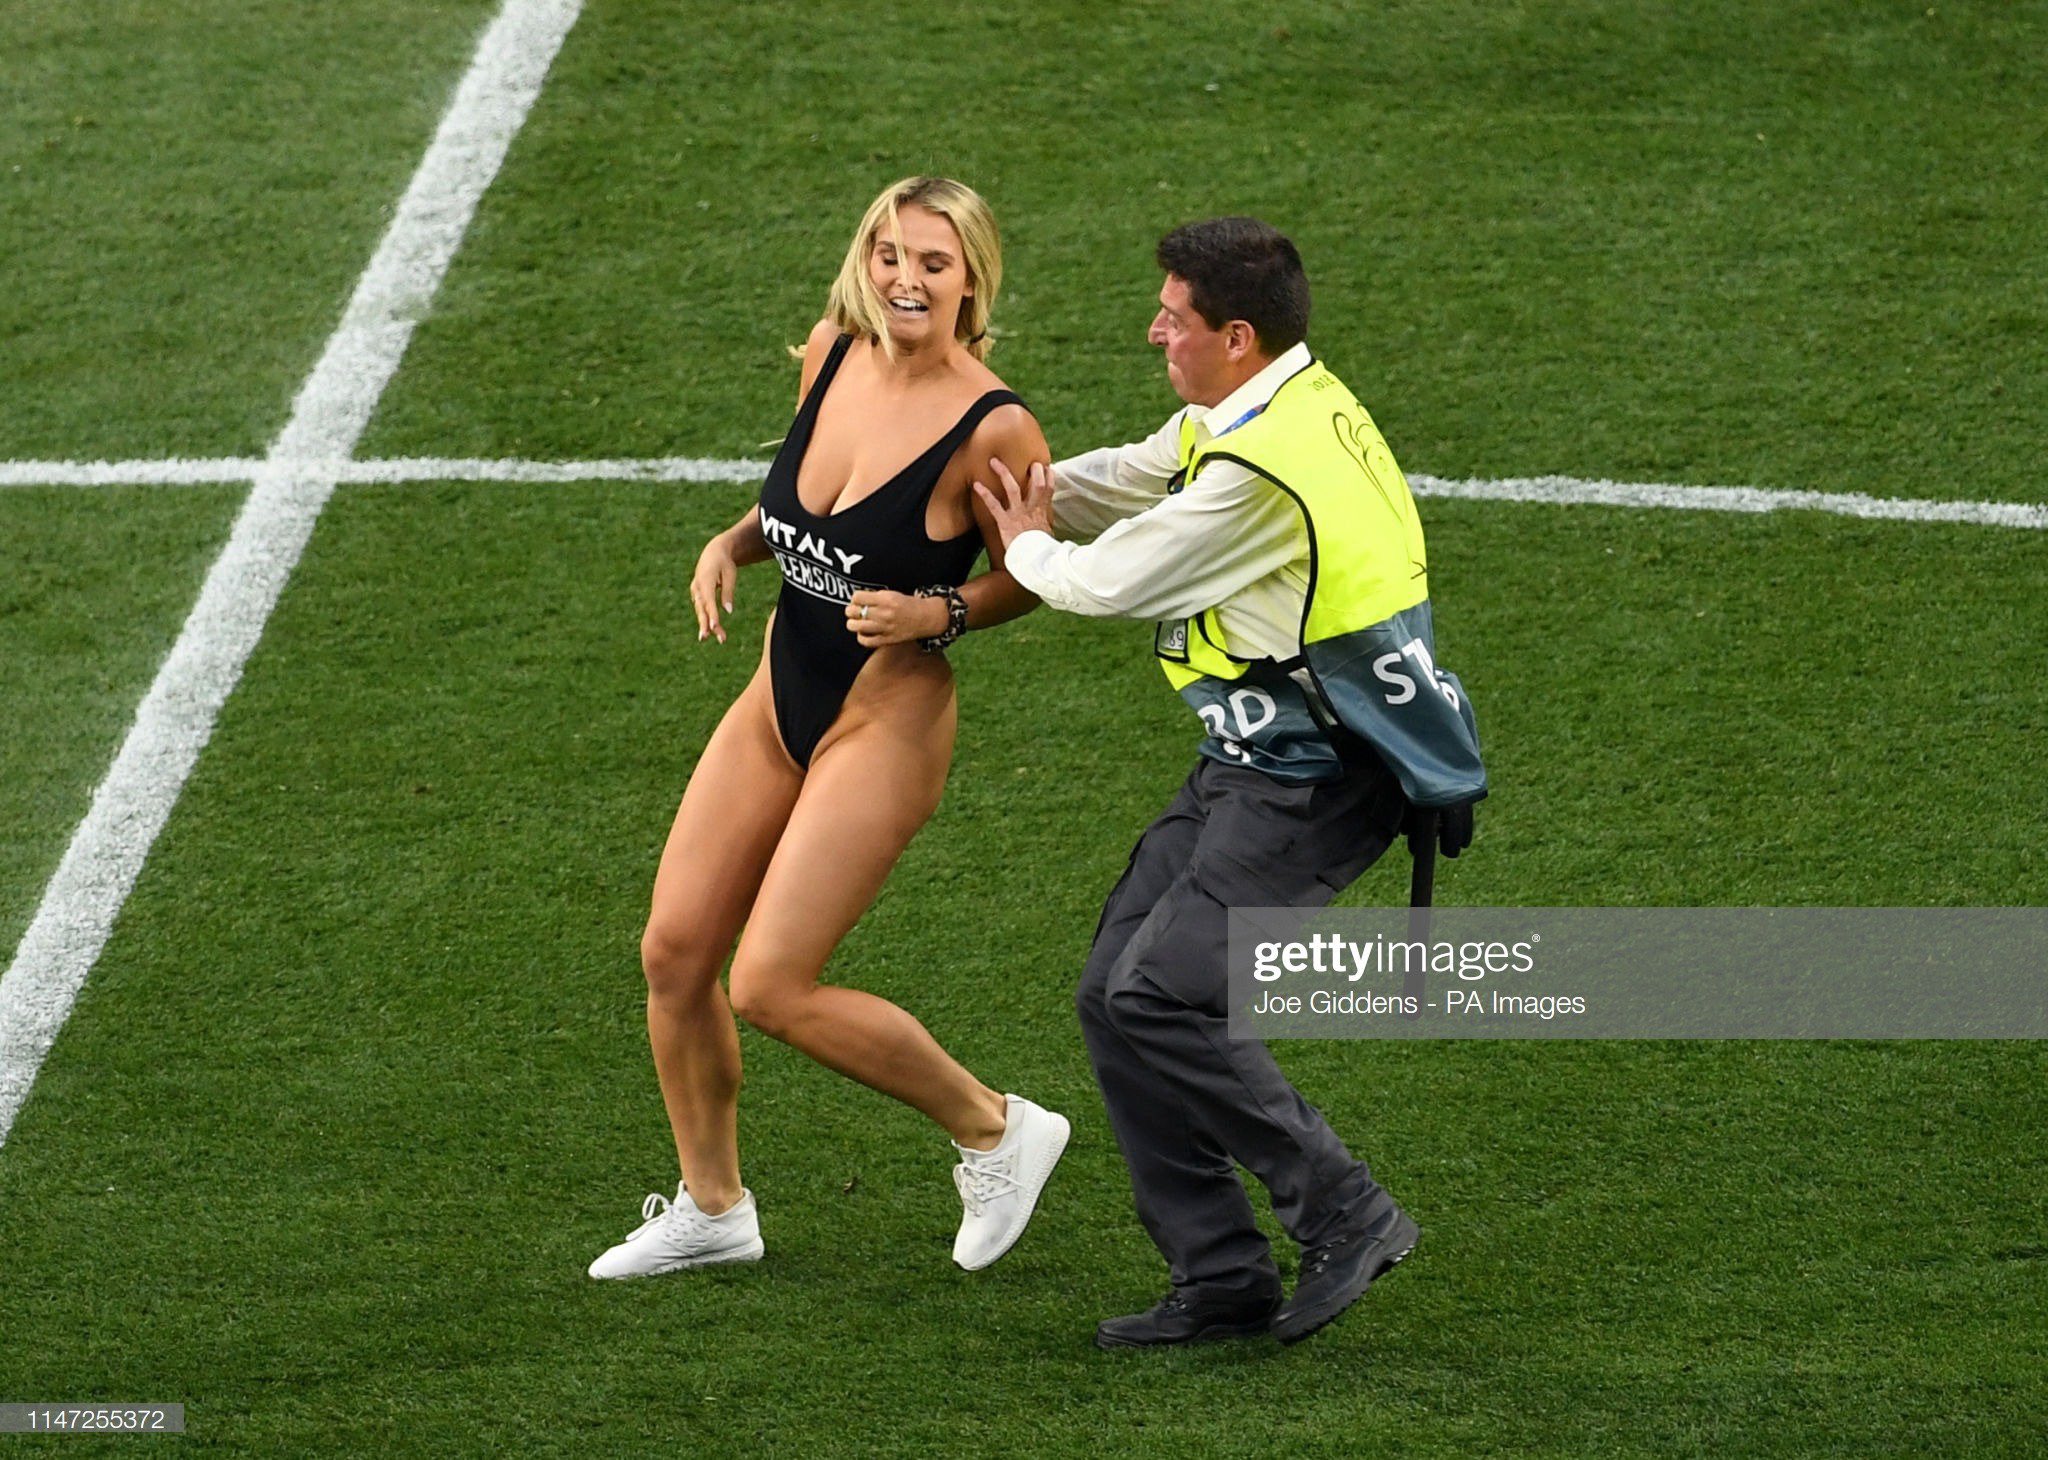 Champ on Twitter: "Streaker on the pitch at the League Final. I think that's only time someone hot streaked 😂 https://t.co/C6yc1234pK" / Twitter